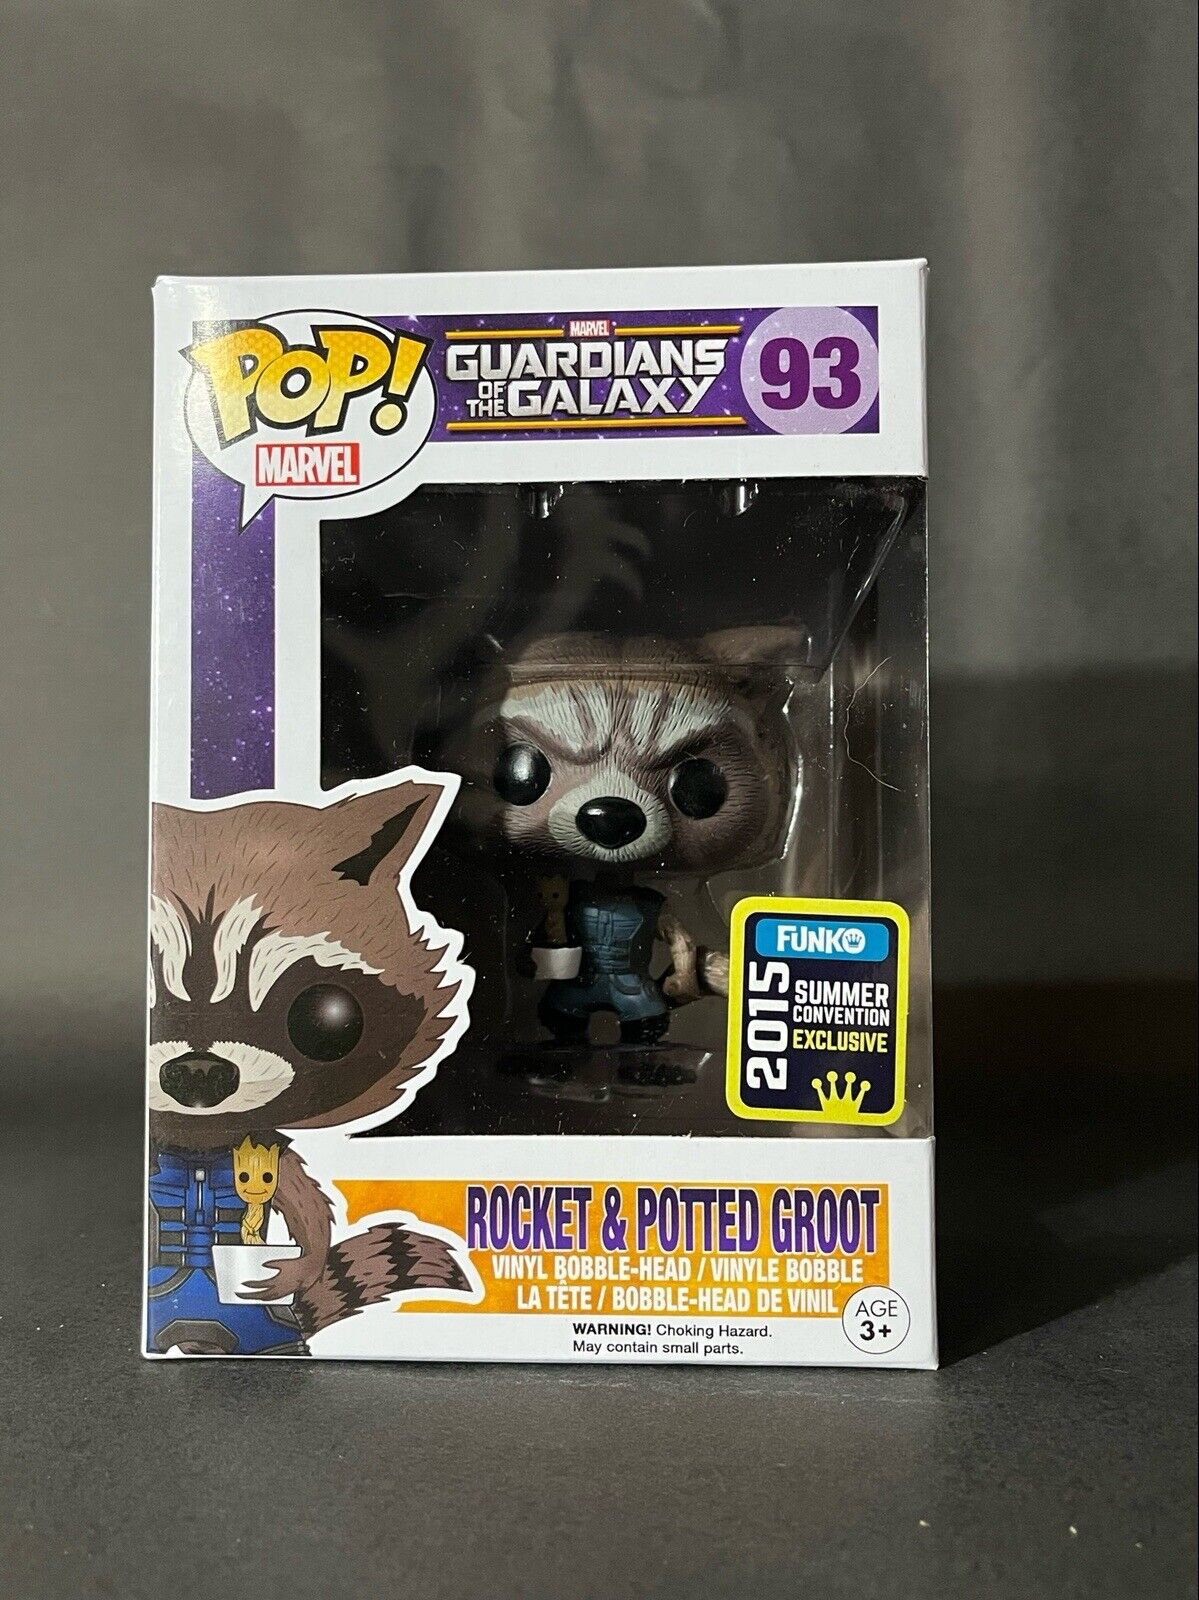 FUNKO POP ROCKET & POTTED GROOT #93 SDCC 2015 GUARDIANS OF THE GALAXY MAY